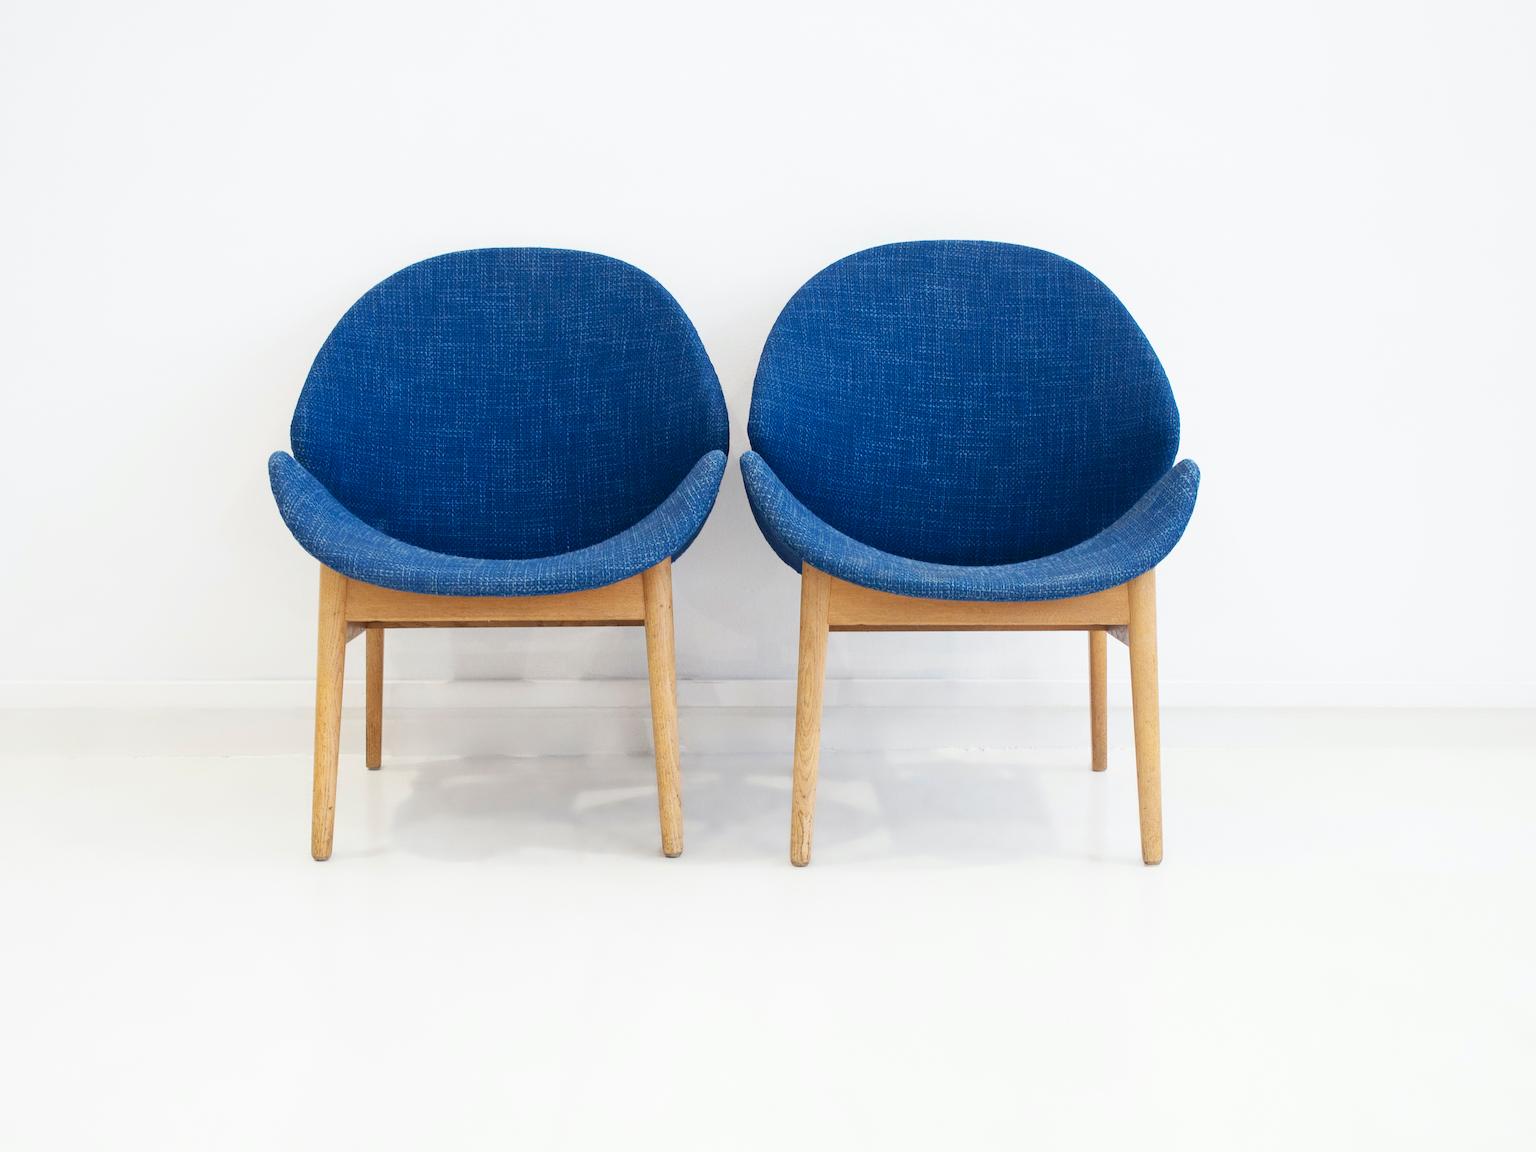 Pair of chairs designed by Hans Olsen in 1955 with oak frame, seat and back made of bentwood, upholstered in blue wool. Manufactured by N. A. Jørgensens Møbelfabrik, model 134/55.